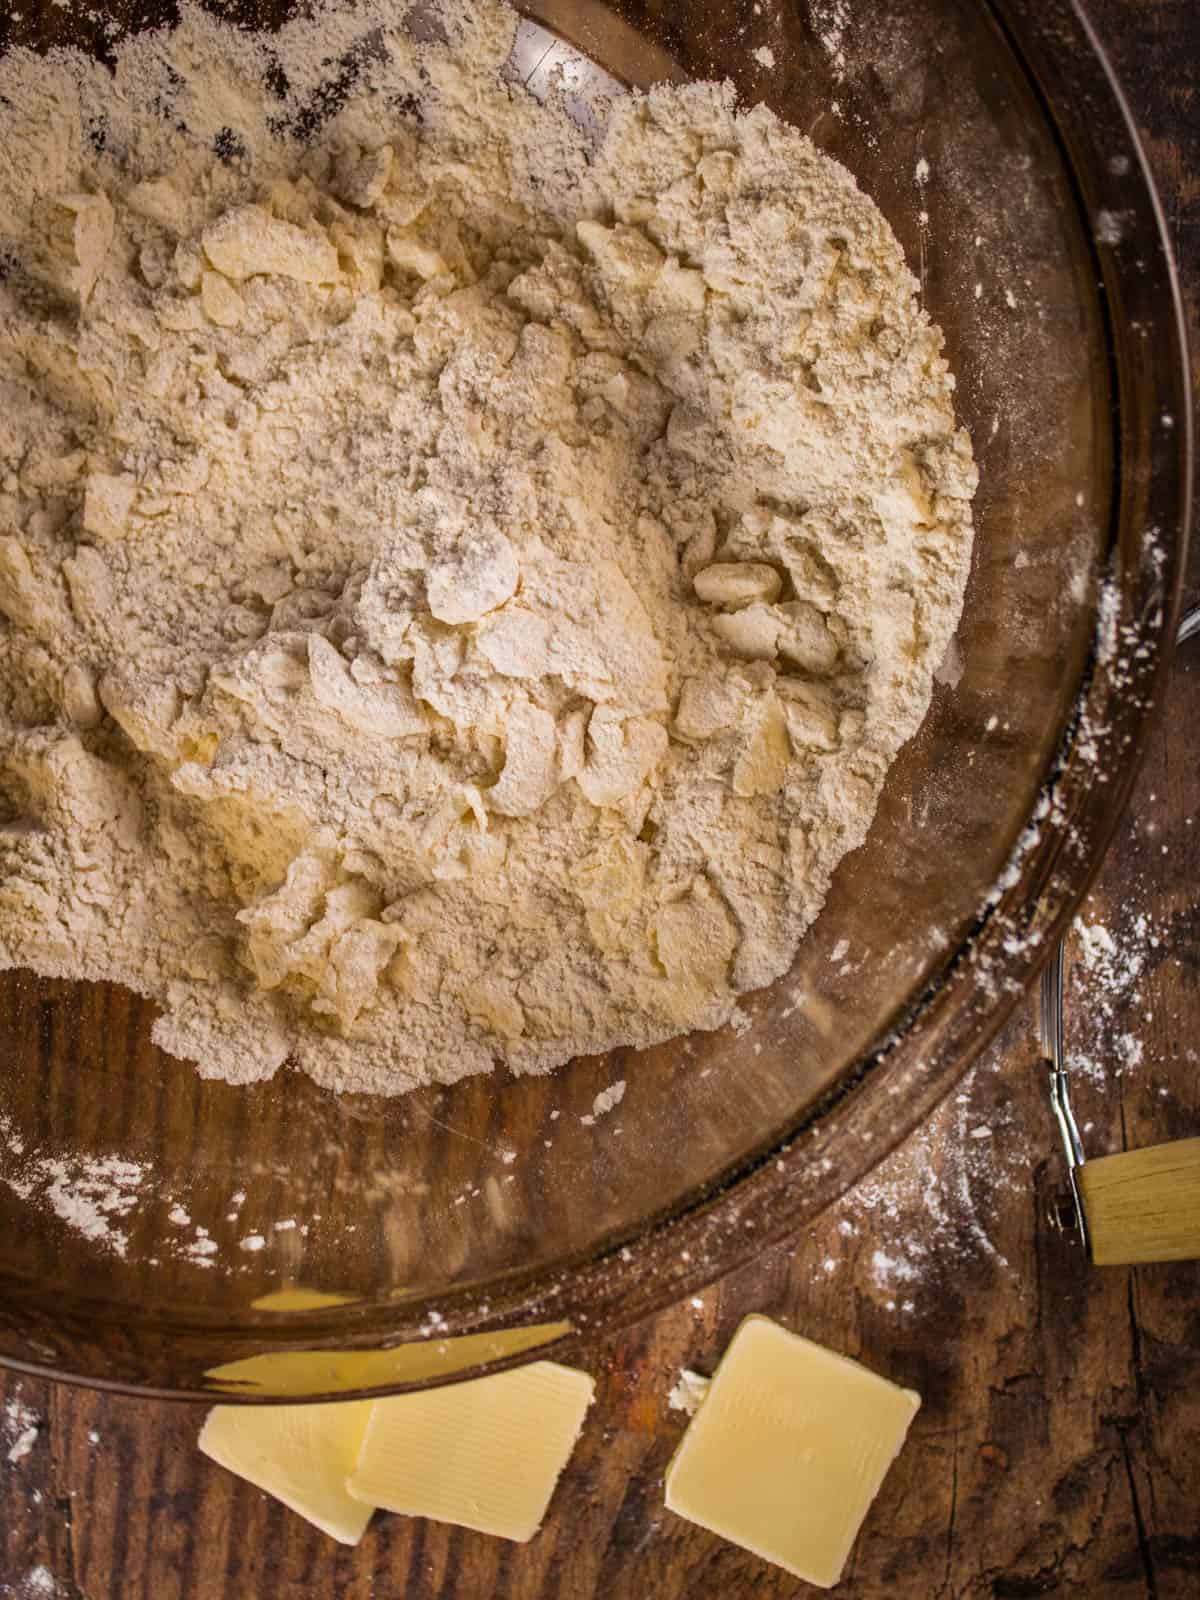 butter crumbled into flour